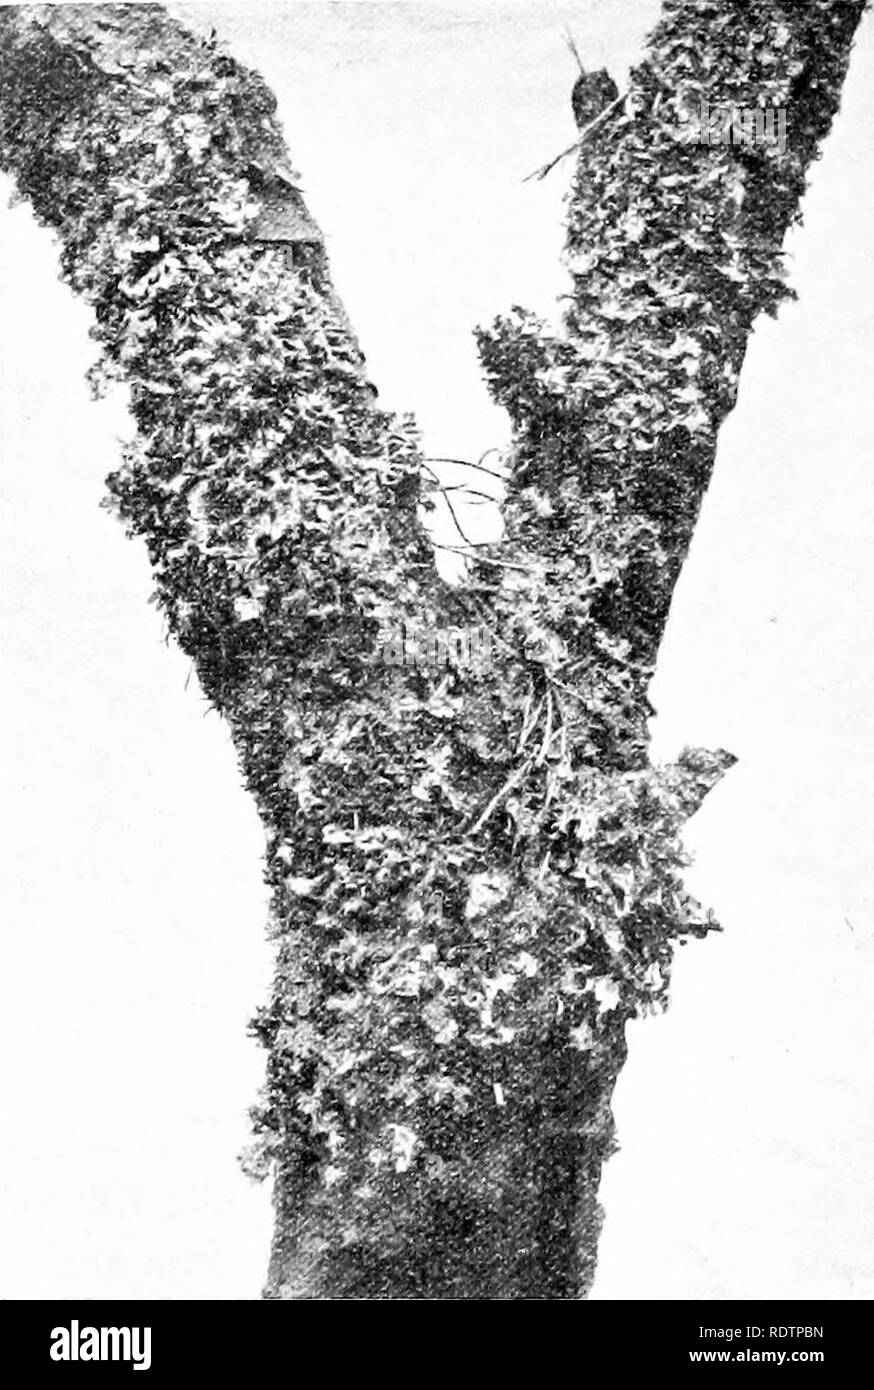 . Lichens. Lichens. 146 MORPHOLOGY narrower than the others and are very frequently raised from contact with the substratum. They tend to grow out from the thallus in an upright. Fig. 84. Parmelia physodes Ach. Thallus growing ver- tically ; soredia chiefly on the lobes directed downwards, reduced (M. P., Photo.). direction and then to turn backwards at the tip, so that the opening of tiie soraHum is directed downwards. Bitter says that the cause of this change in direction is not clear, though possibly on teleological reasoning it is of advantage that the opening of the soralium should be pro Stock Photo